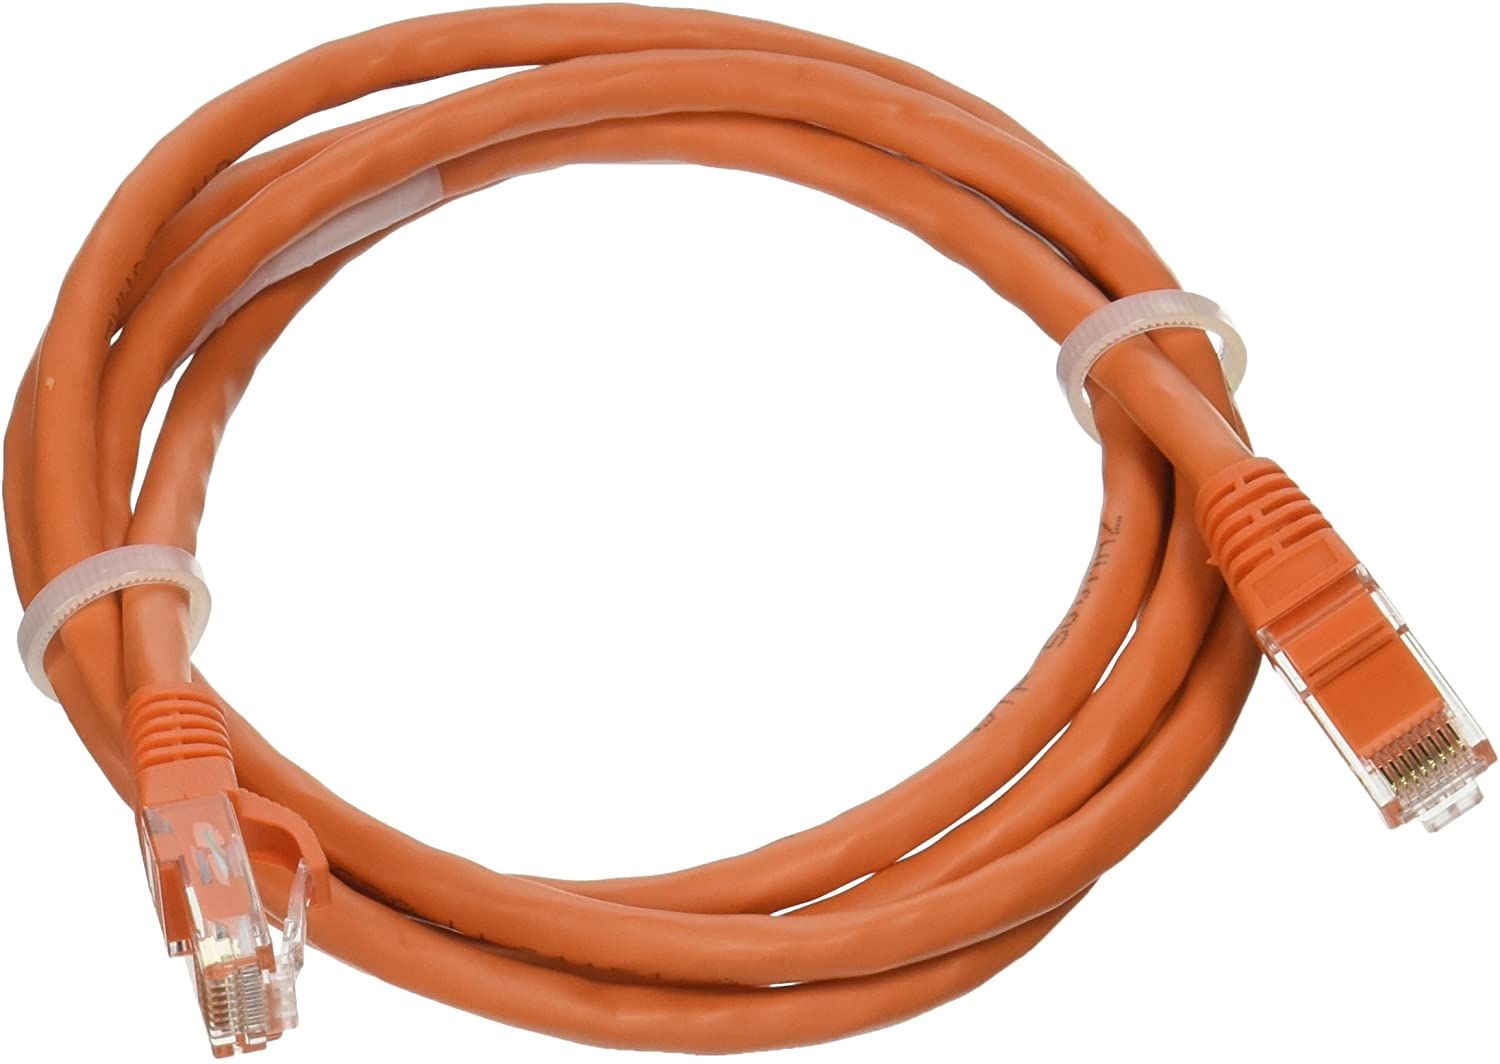 Crossover Cable vs Ethernet Cable: What's the Difference